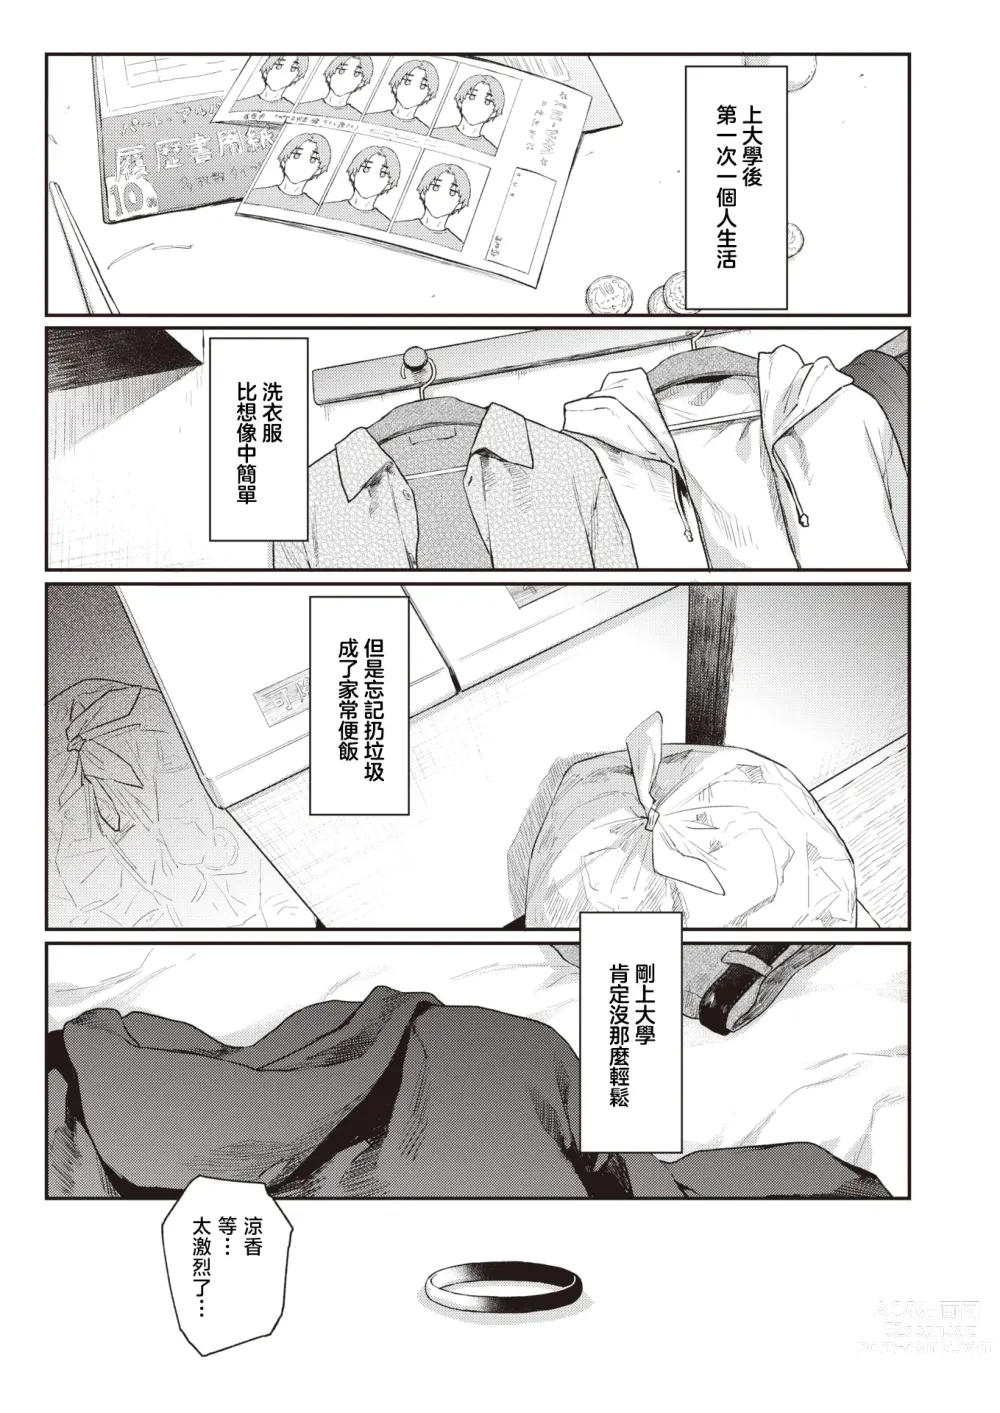 Page 1 of doujinshi 自用